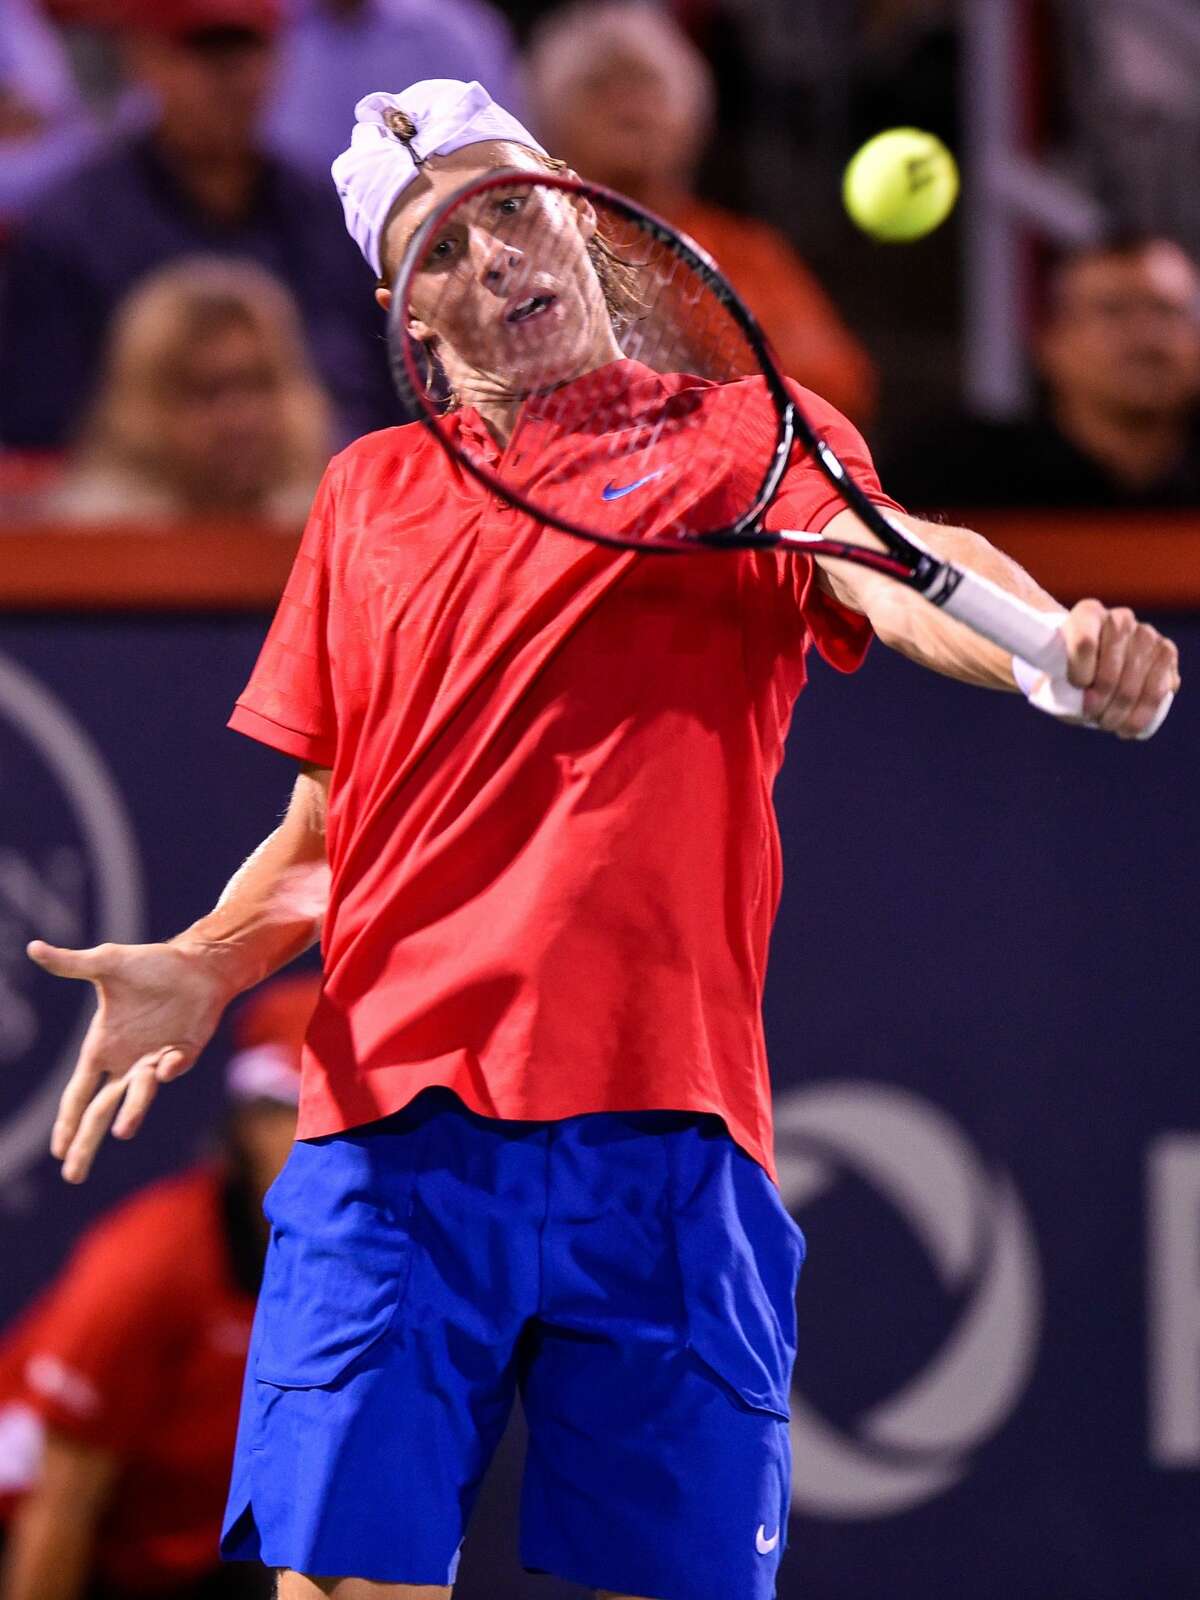 MONTREAL, QC - AUGUST 10: Denis Shapovalov of Canada hits a return shot against Rafael Nadal of Spain during day seven of the Rogers Cup presented by National Bank at Uniprix Stadium on August 10, 2017 in Montreal, Quebec, Canada. Denis Shapovalov of Canada defeated Rafael Nadal of Spain 6-3, 4-6, 6-7. (Photo by Minas Panagiotakis/Getty Images)